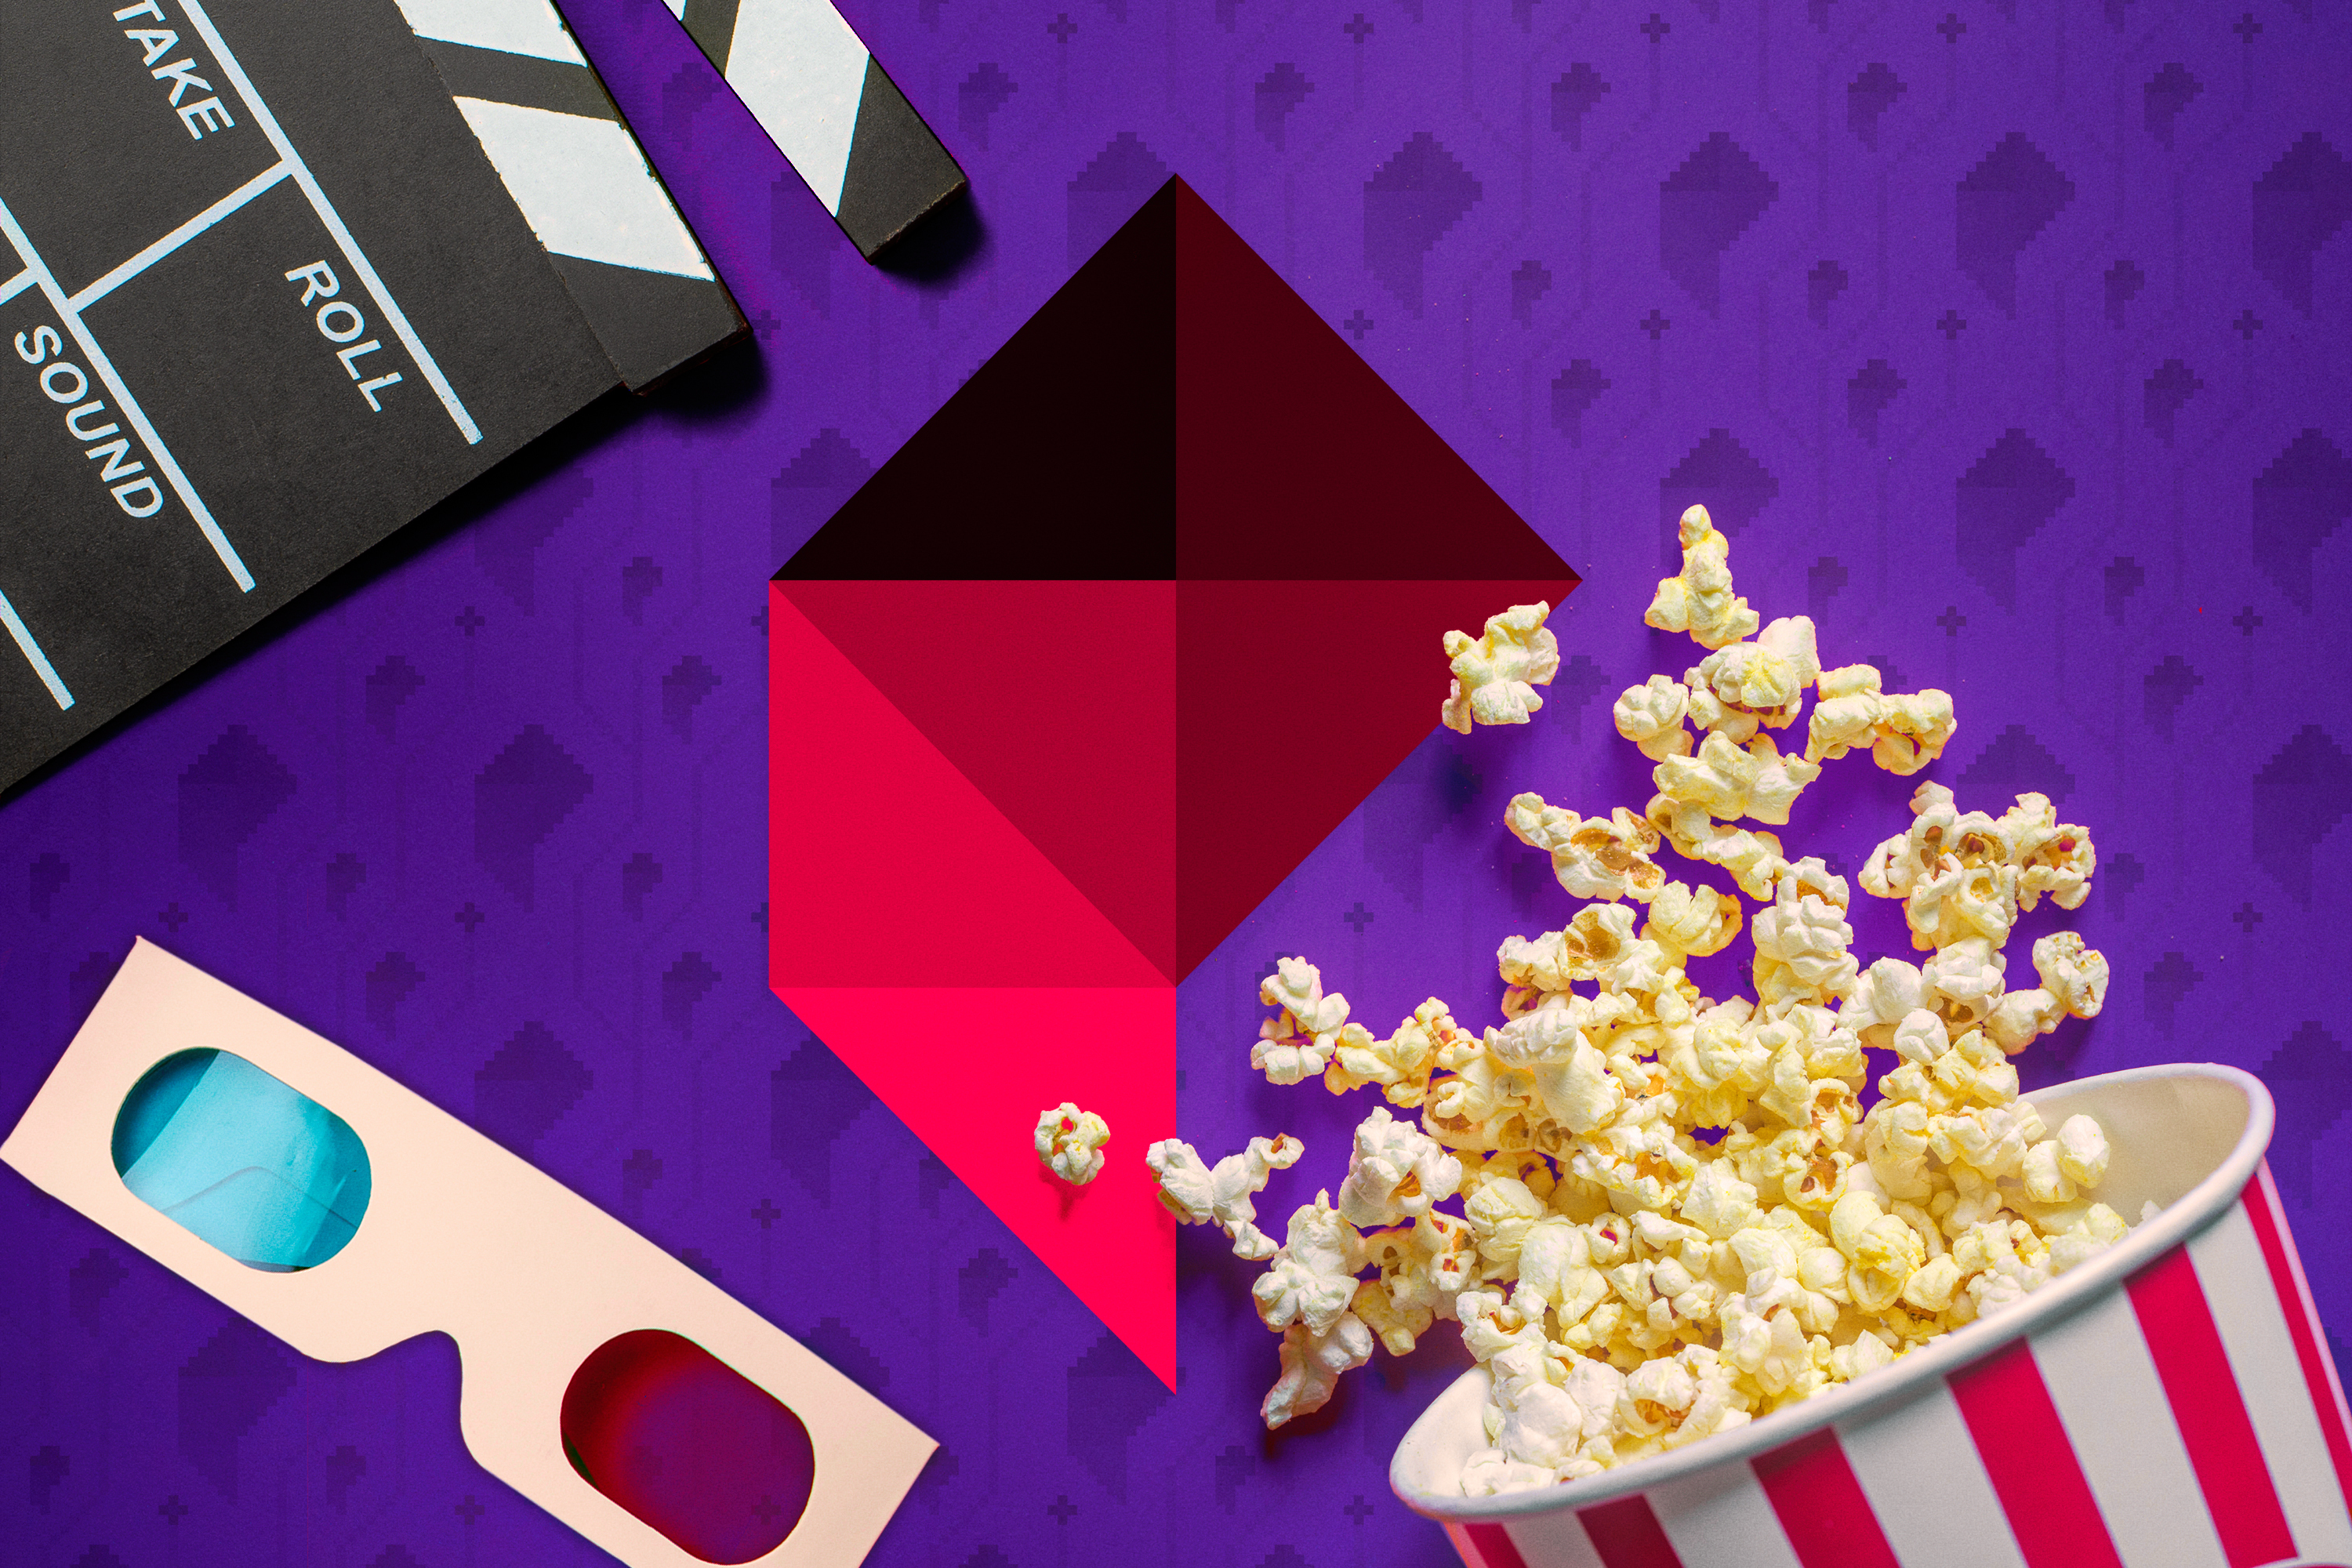 A popcorn bucket next to a film clapper, 3D glasses, and the Polygon logo set against a purple background.